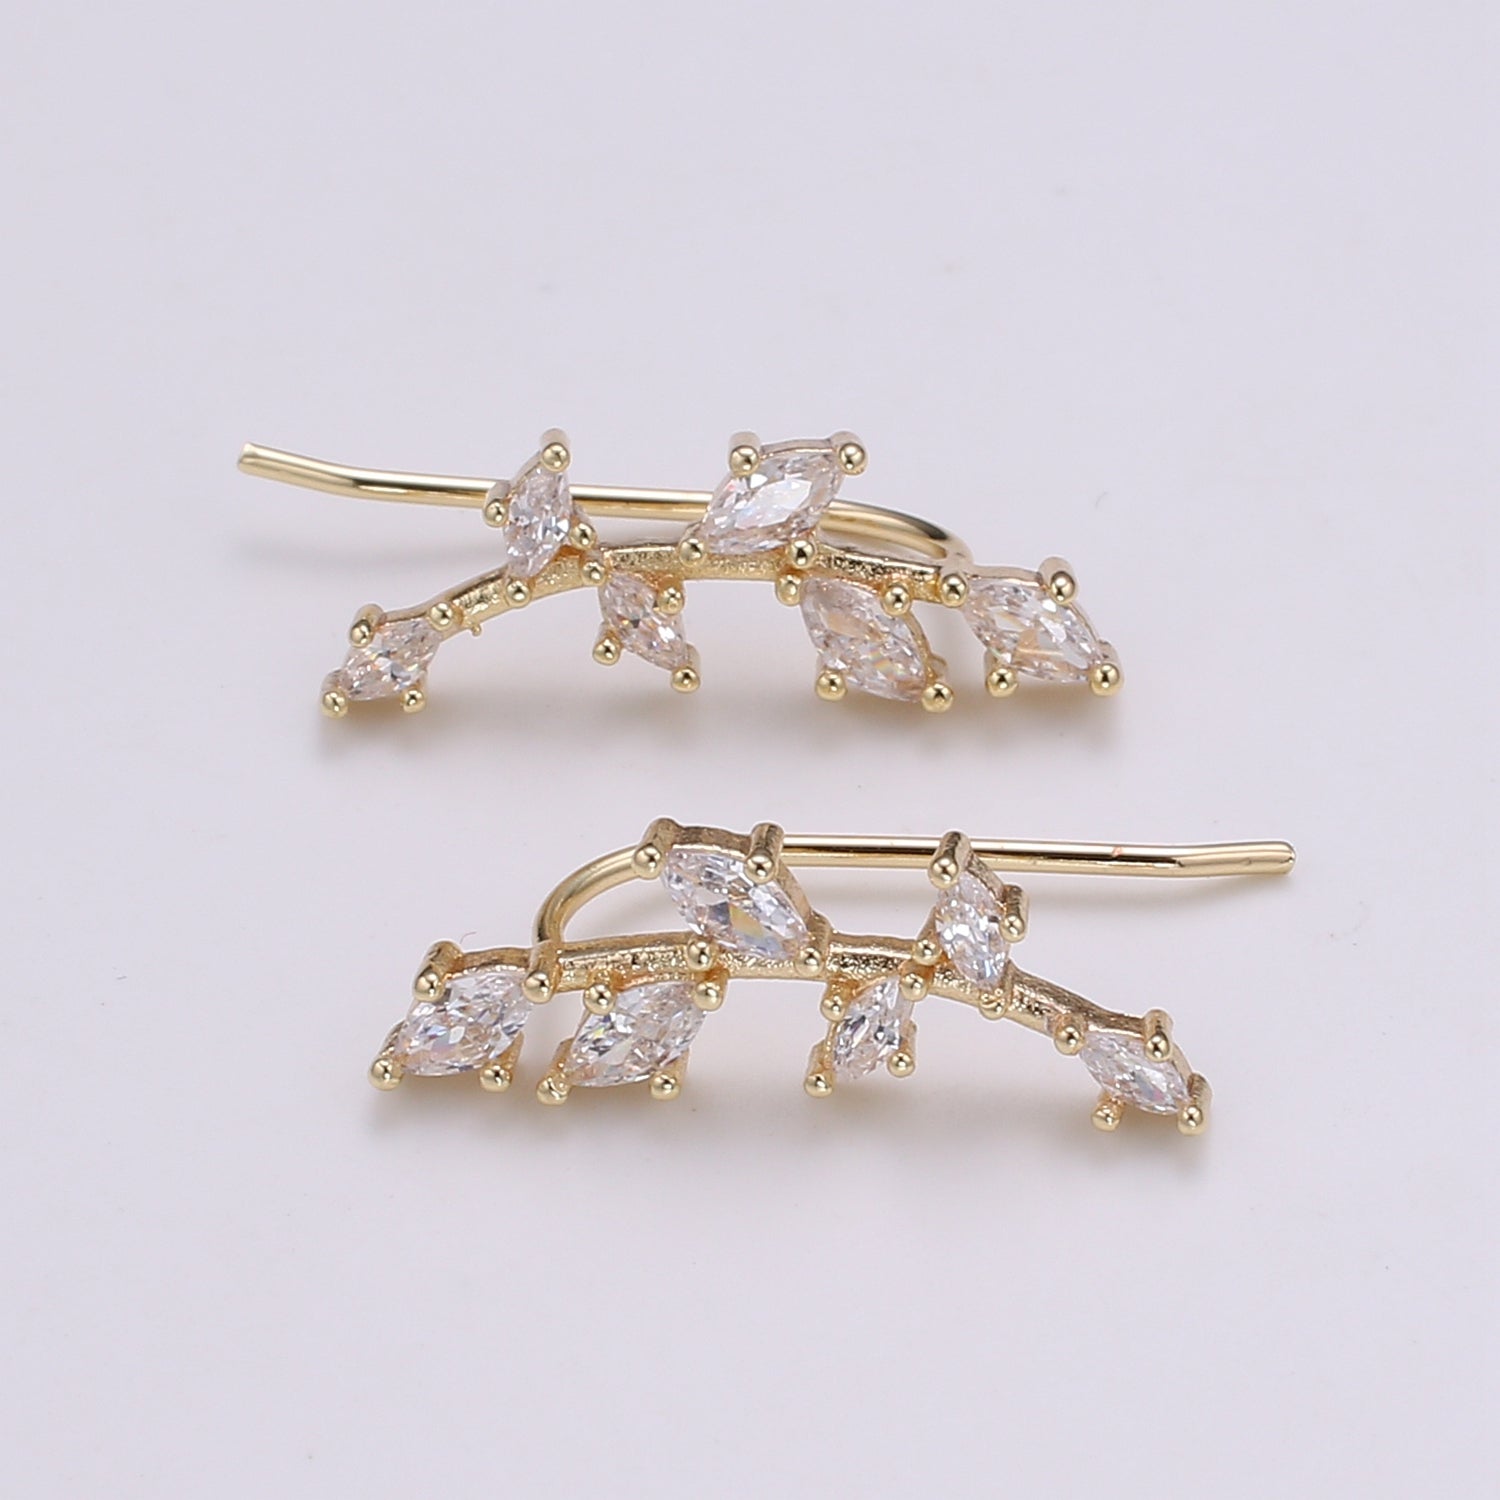 1 Pair Wheat Fruit Cubic Pave Gold Drop Earring Bran Pave CZ Hook Closure Earring, Gold Micro Pave Earcuff, Earring Clips, P-010 - DLUXCA